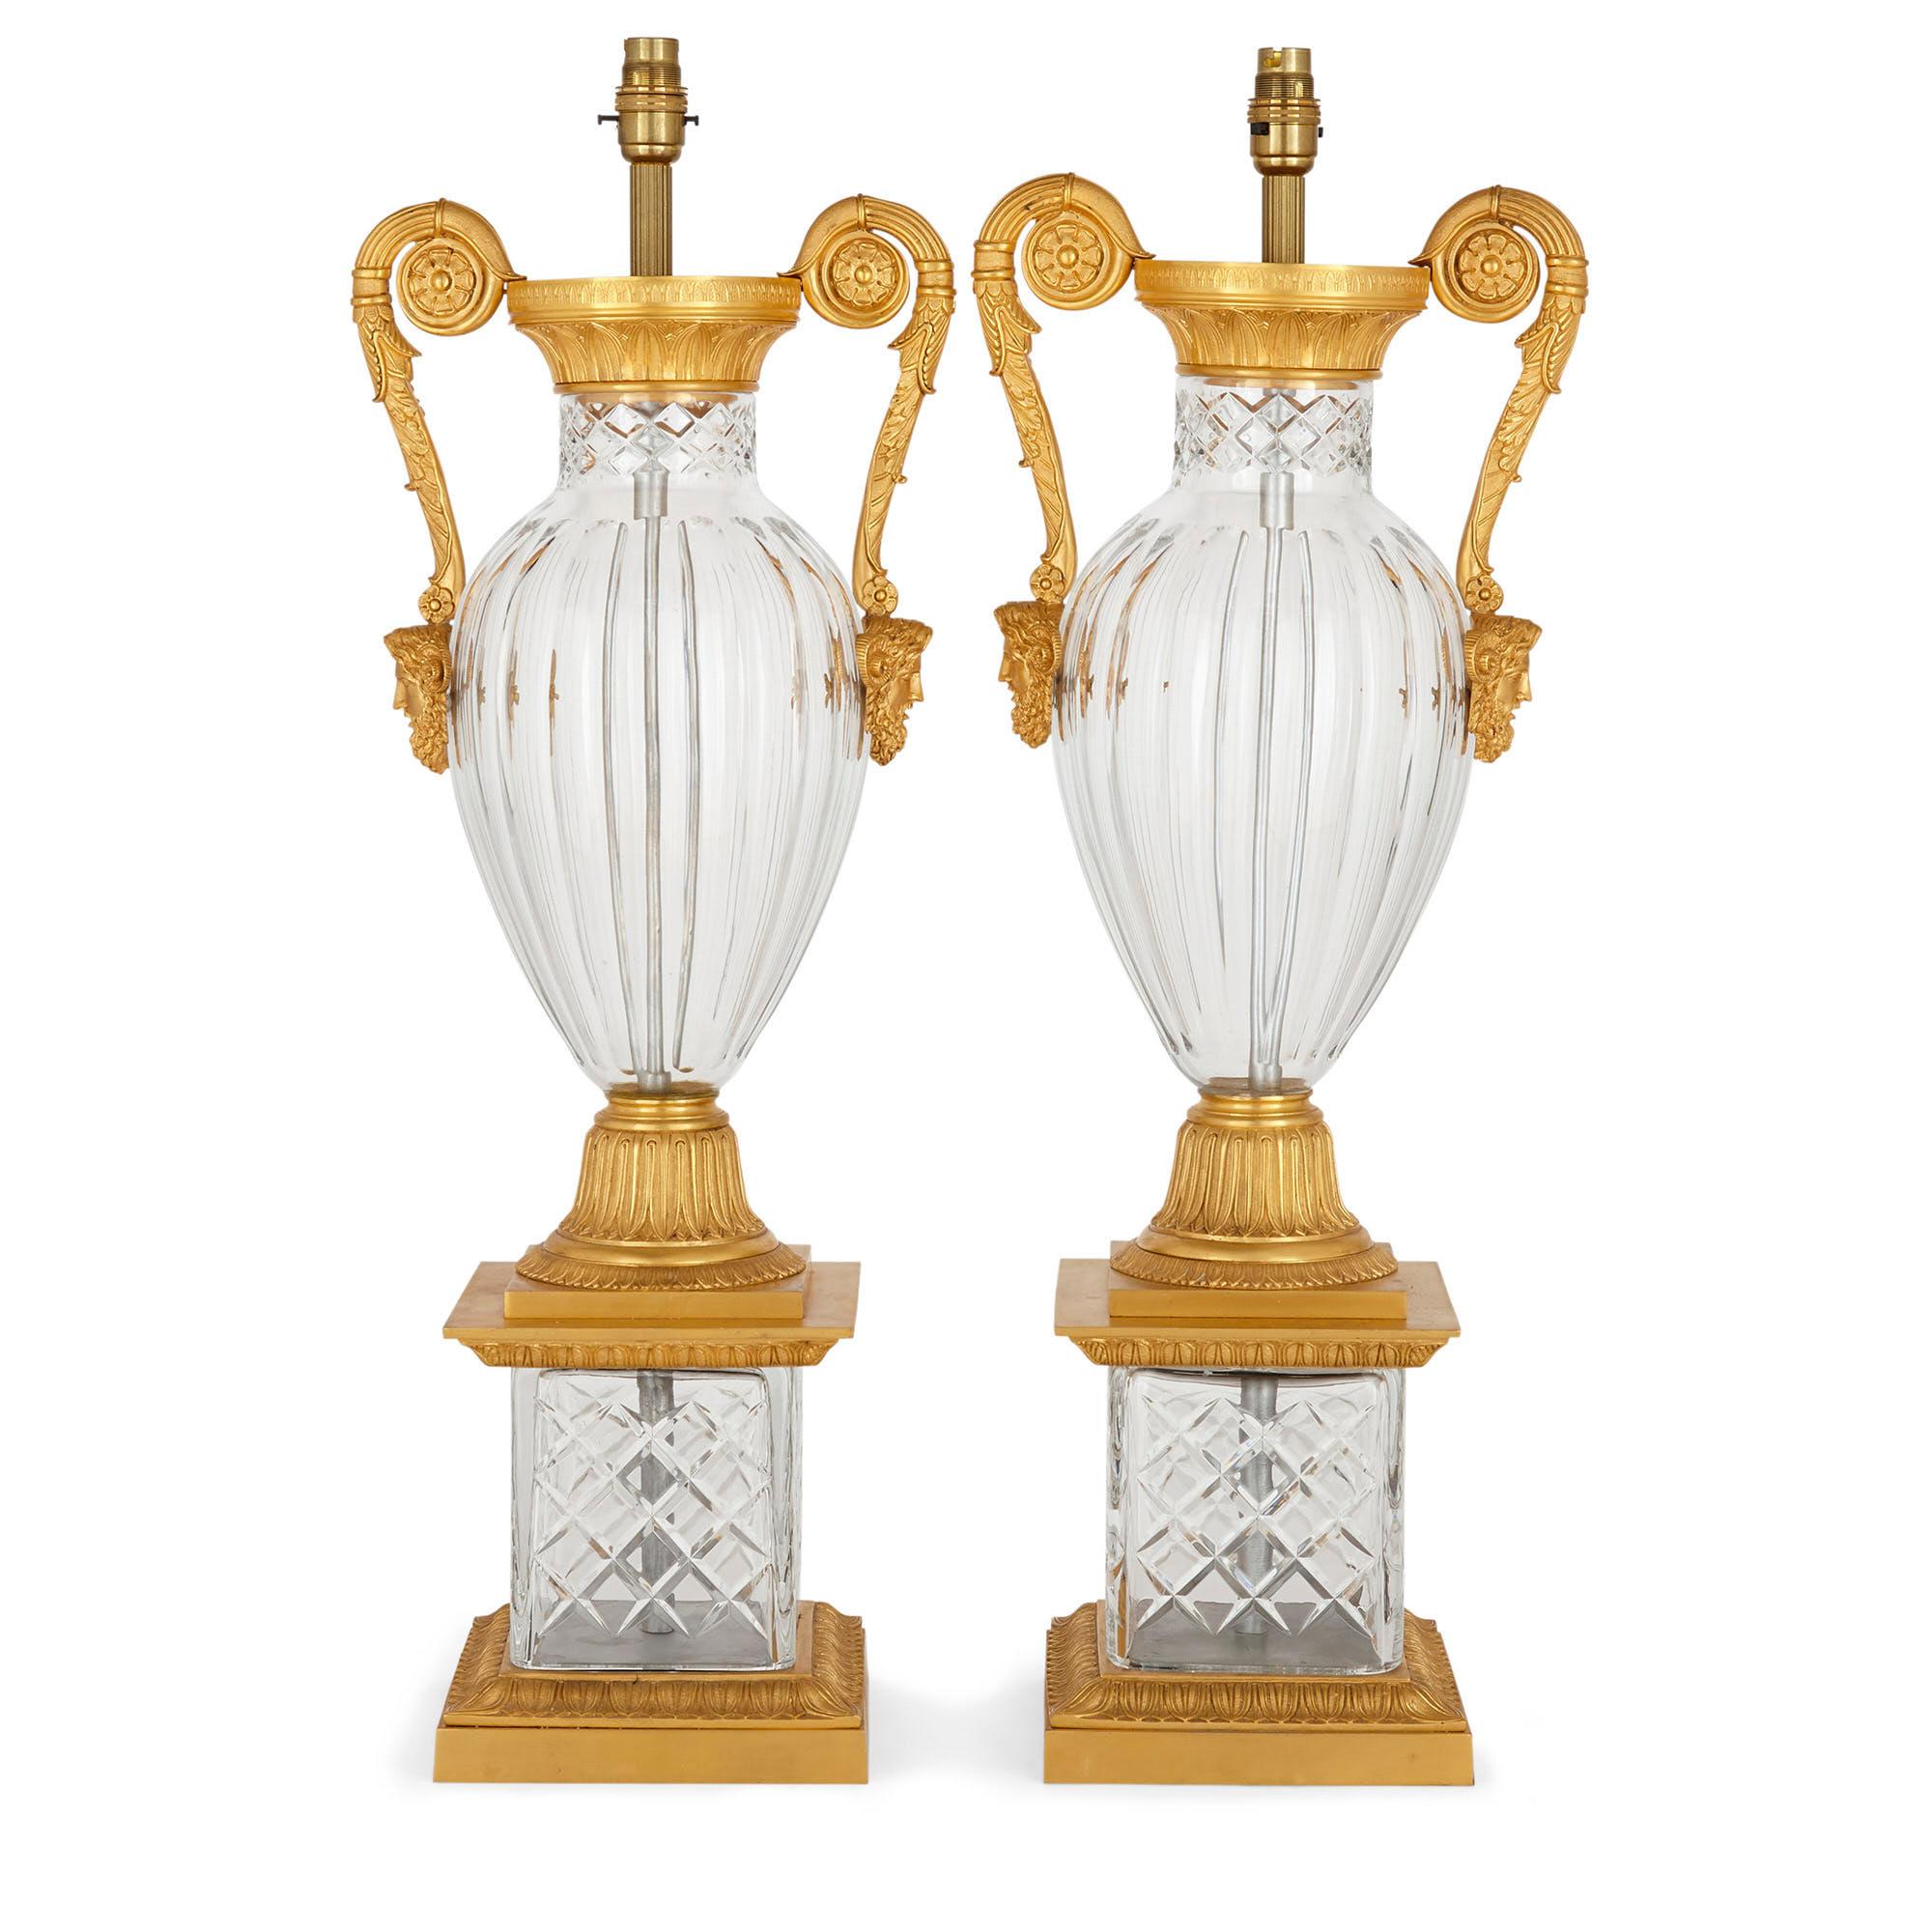 Pair of French neoclassical style gilt bronze and cut glass lamps
French, 20th century
Dimensions: Height 75cm, width 24cm, depth 20cm

Designed in the neoclassical Louis XVI style, this pair of lamps are shaped like vases, and crafted from fine